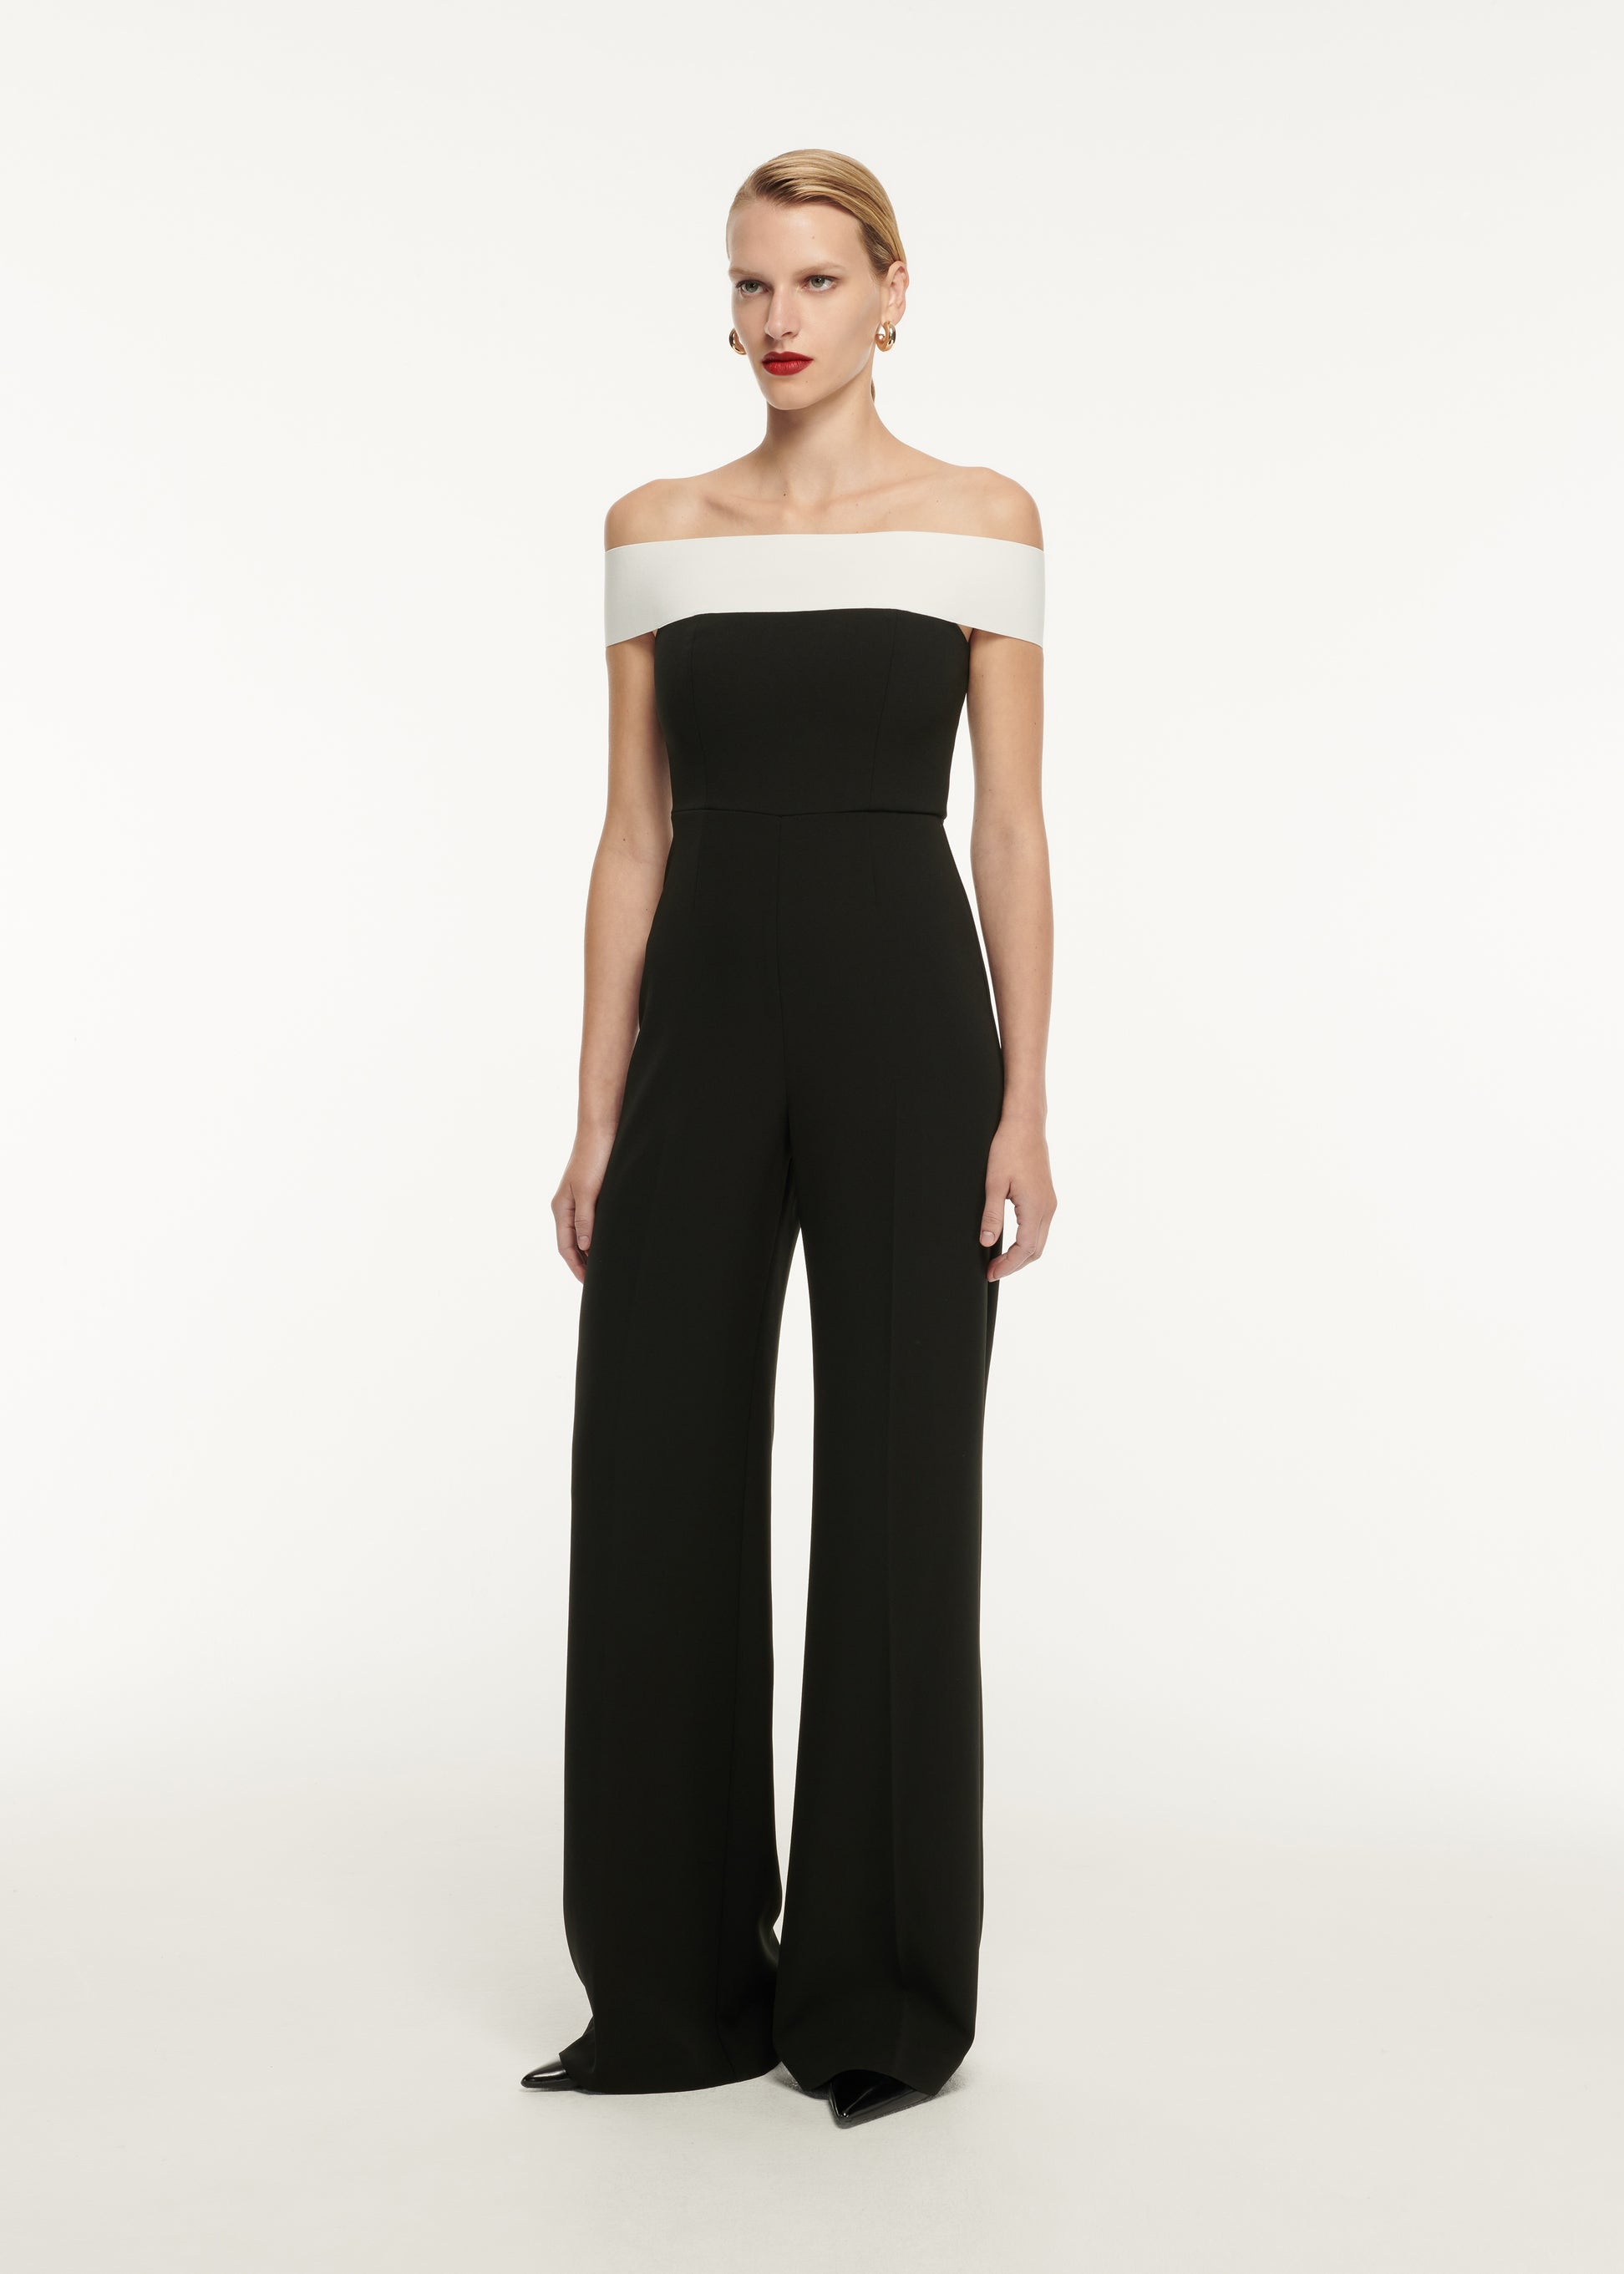 A woman wearing the Off The Shoulder Stretch Cady Jumpsuit